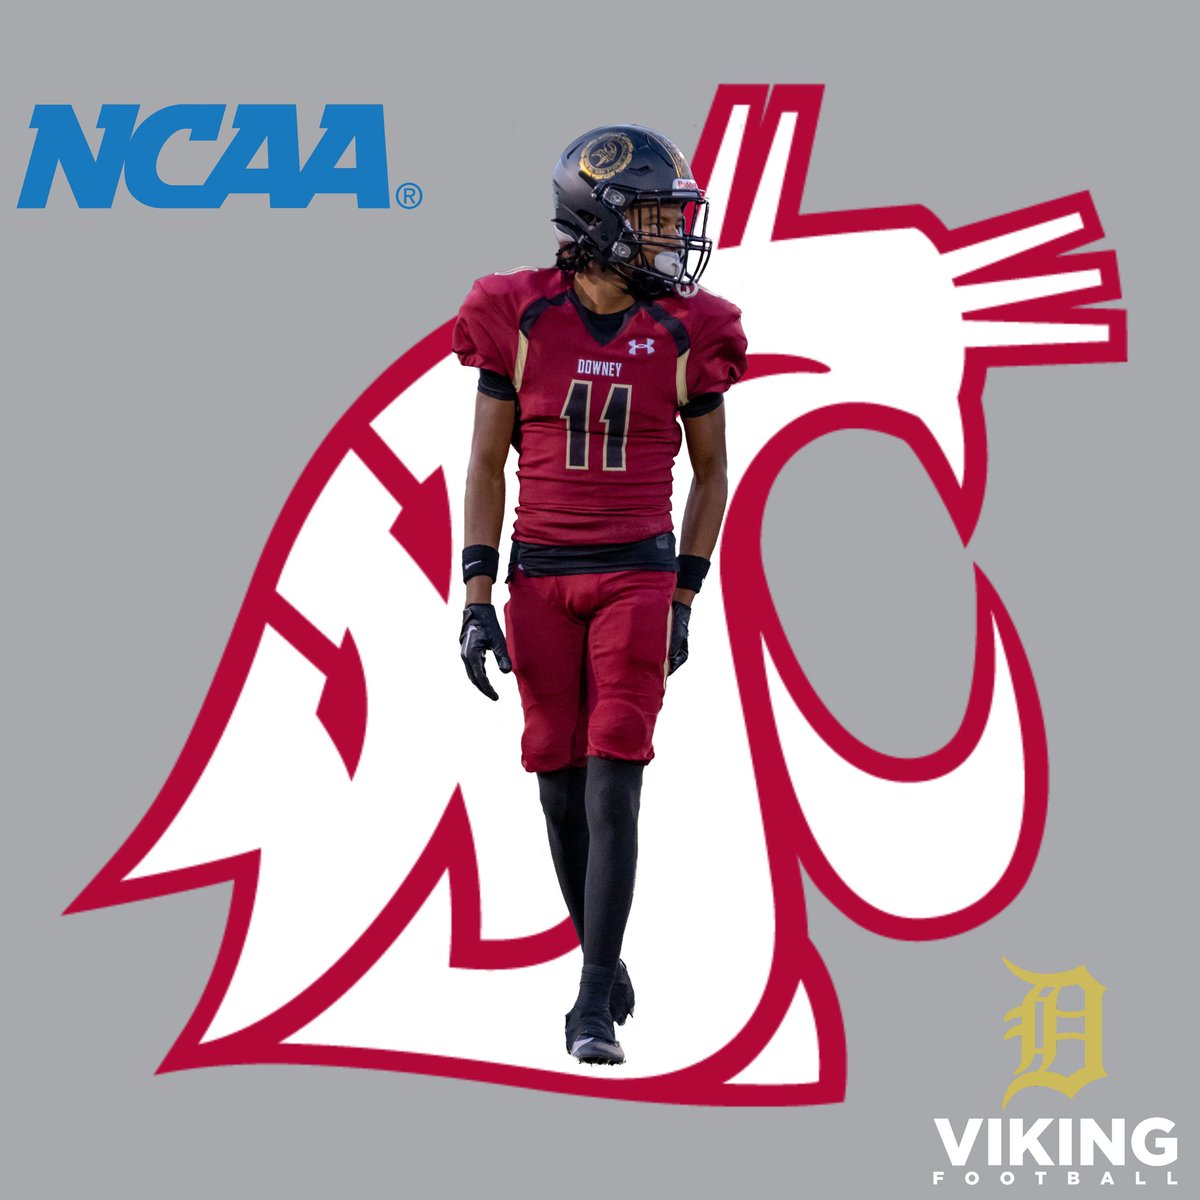 Congrats to c/o27 WR Damani Porras @the_feet_squabbler receiving an offer from Washington State University @wsucougarfb #GOCOUGS ANOTHER ONE! @jt_broooo34